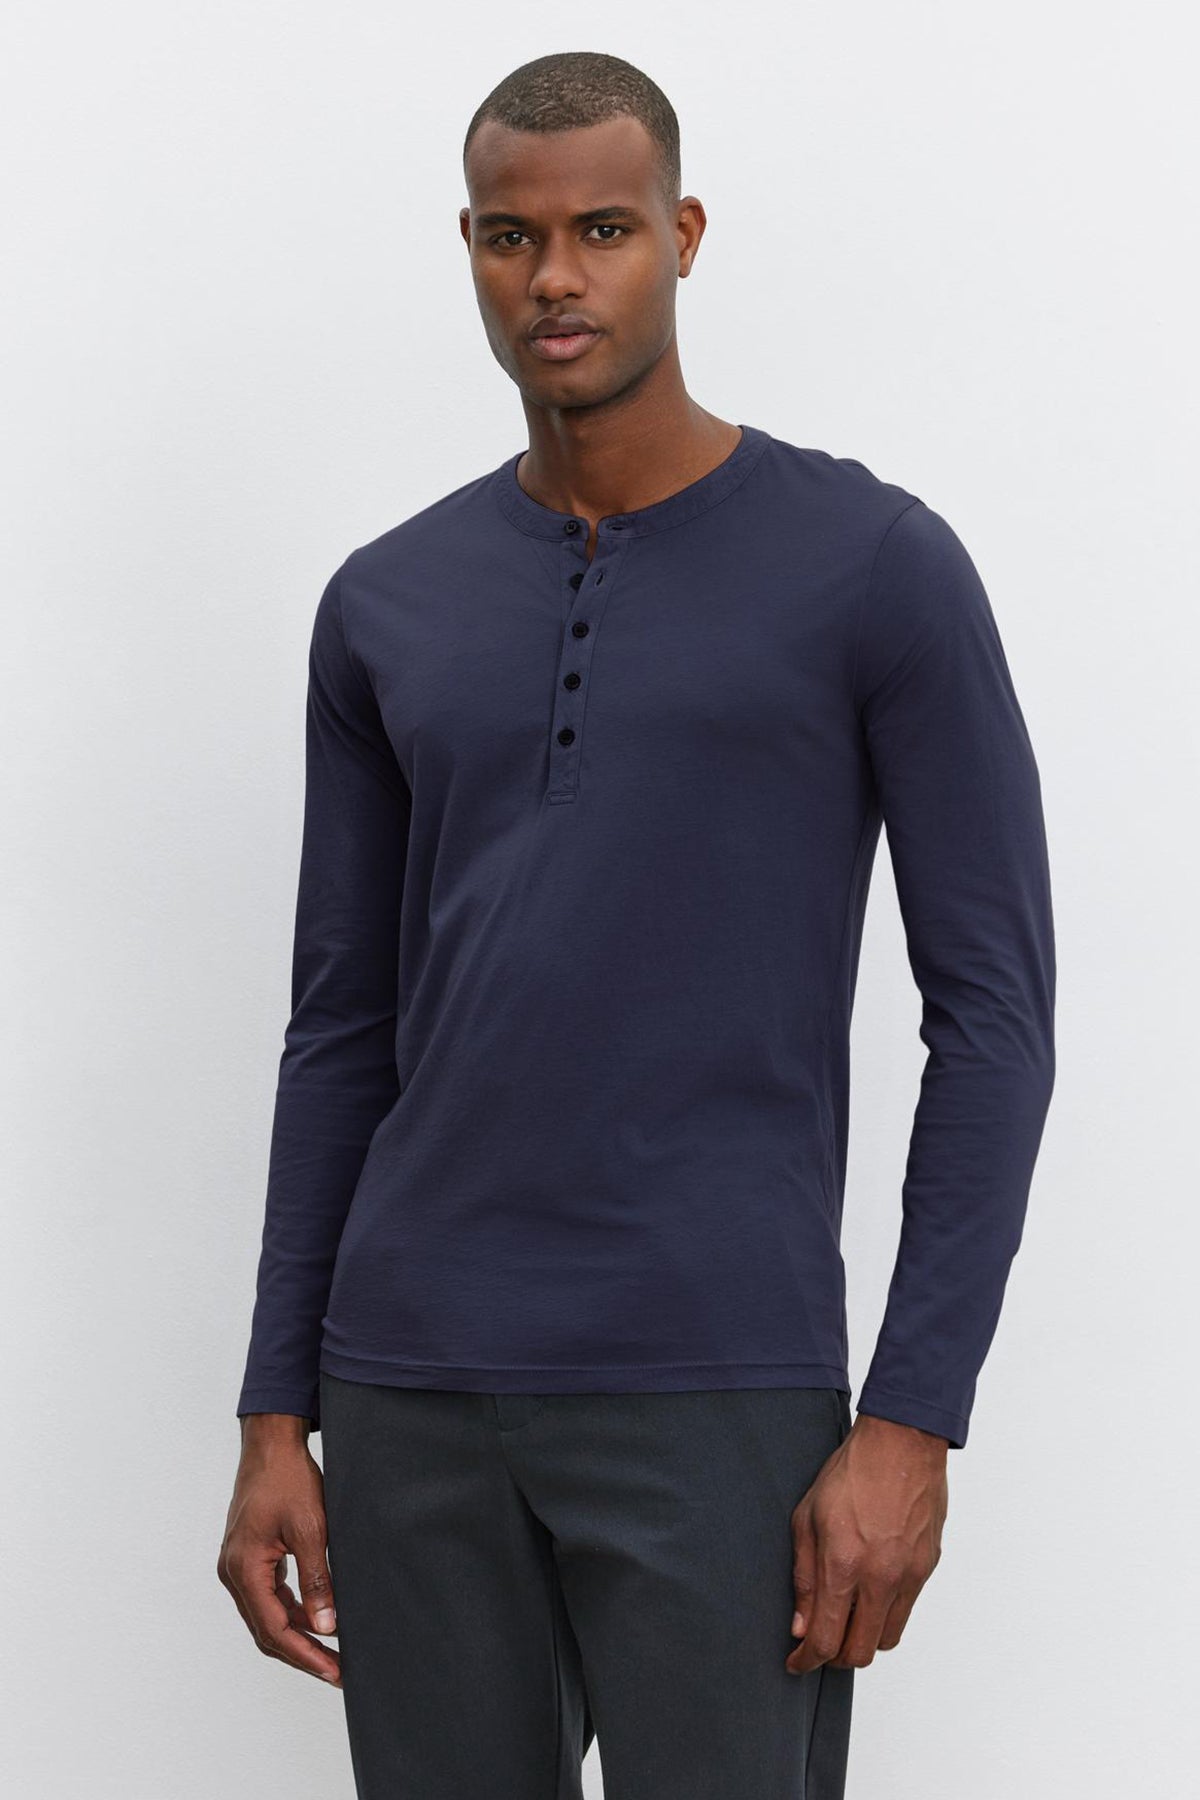   A man stands against a plain background, wearing a long-sleeve, dark blue ALVARO HENLEY by Velvet by Graham & Spencer and dark grey pants. The lightweight whisper knit fabric ensures comfort and style. 